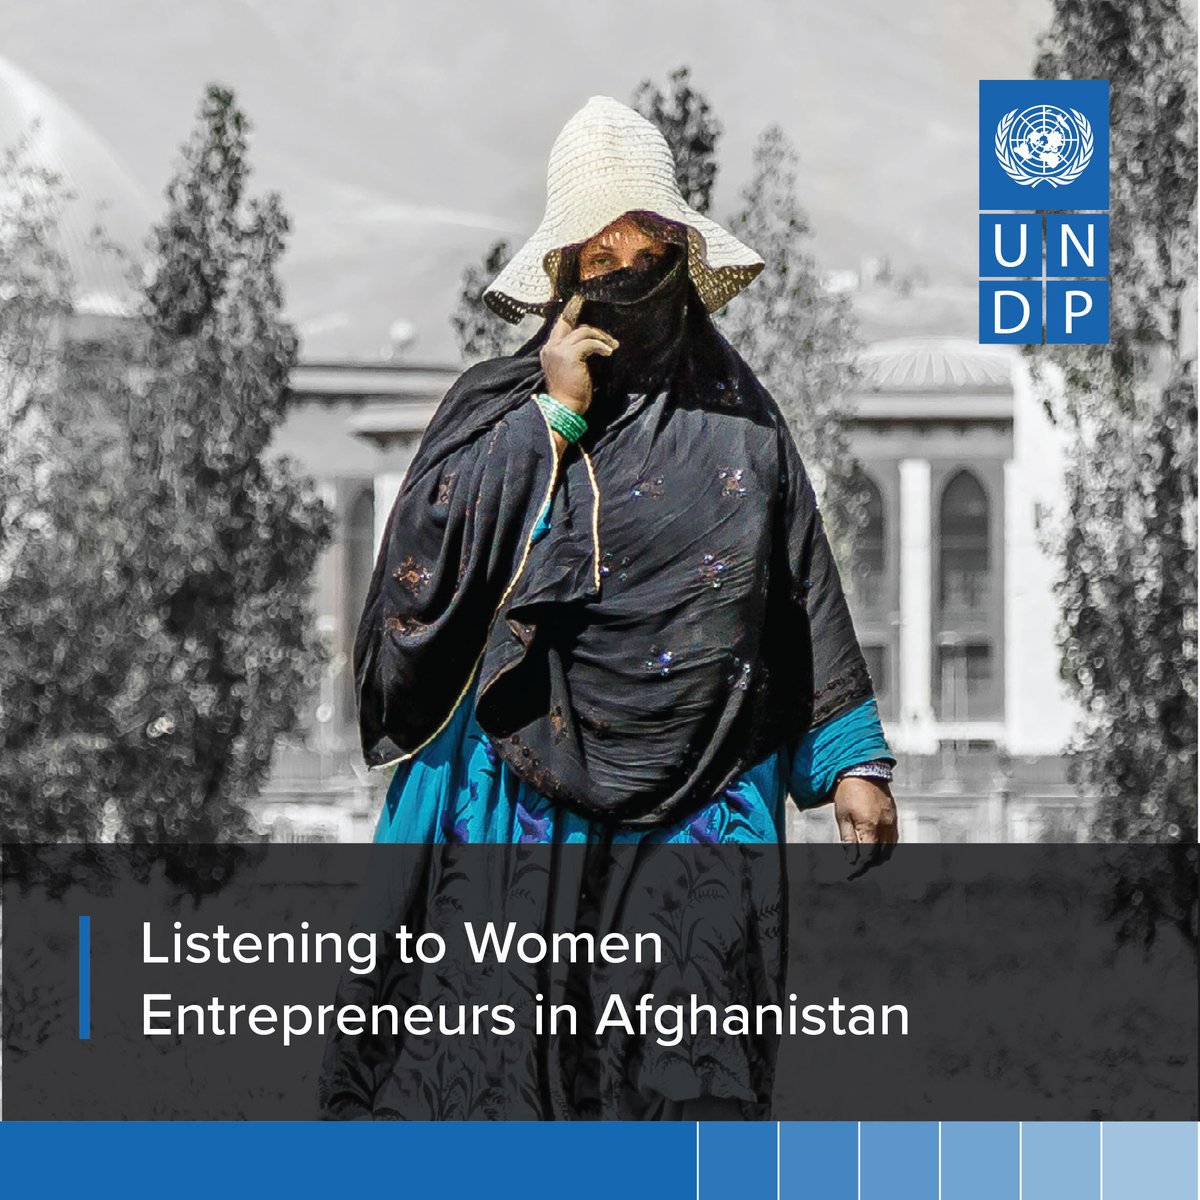 In Afghanistan, women-owned and -led businesses are courageously defying immense challenges. With @UNDP's support, over 900,000 jobs have been created, empowering women to provide for their families. undp.org/afghanistan/pr…